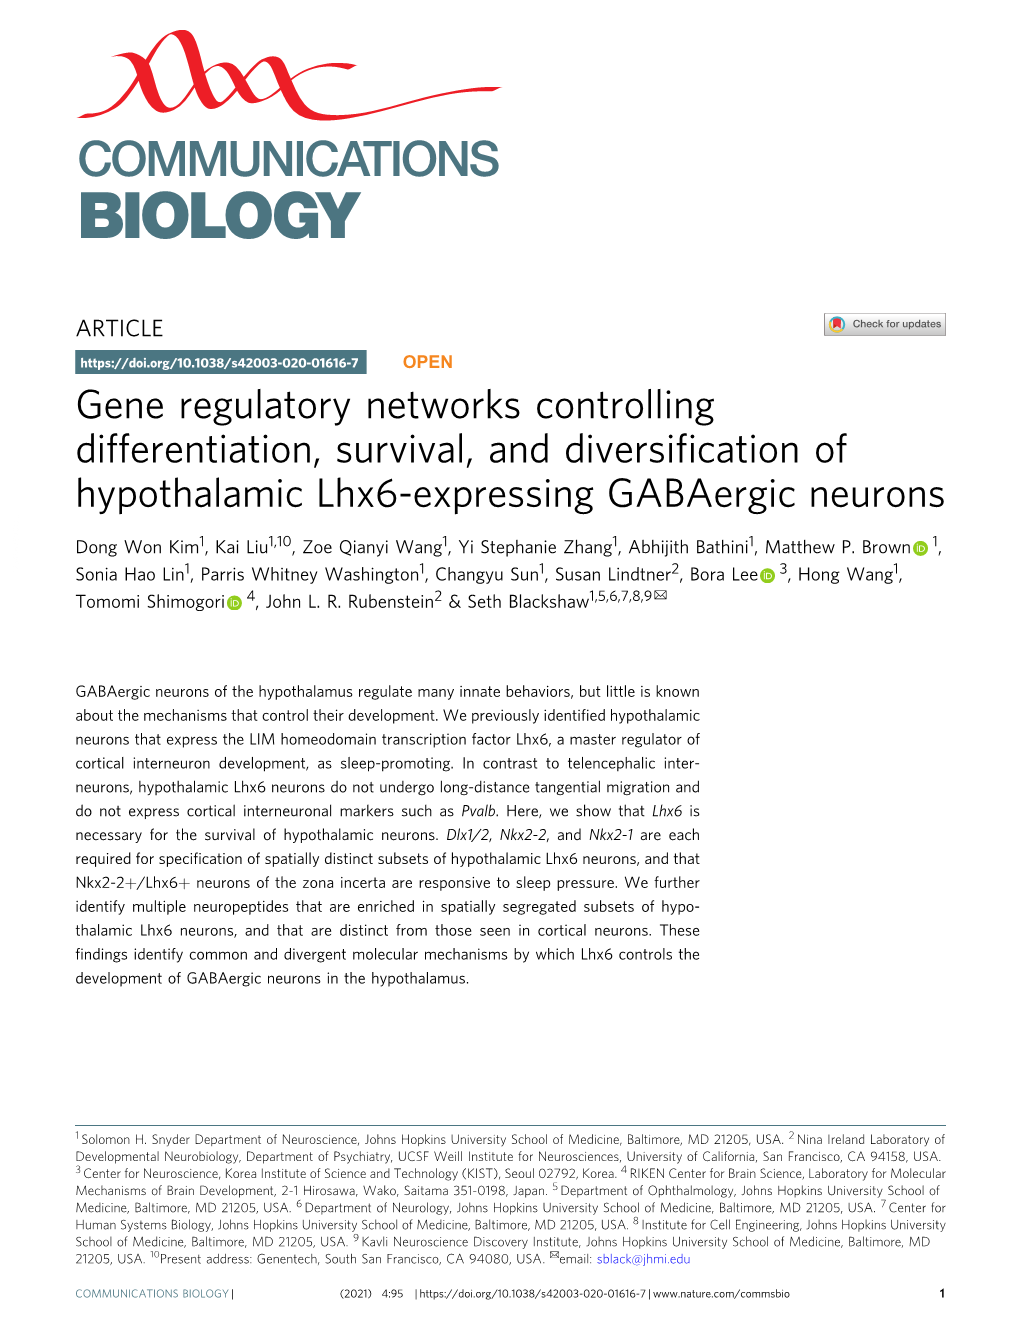 Gene Regulatory Networks Controlling Differentiation, Survival, and Diversification of Hypothalamic Lhx6-Expressing Gabaergic Ne